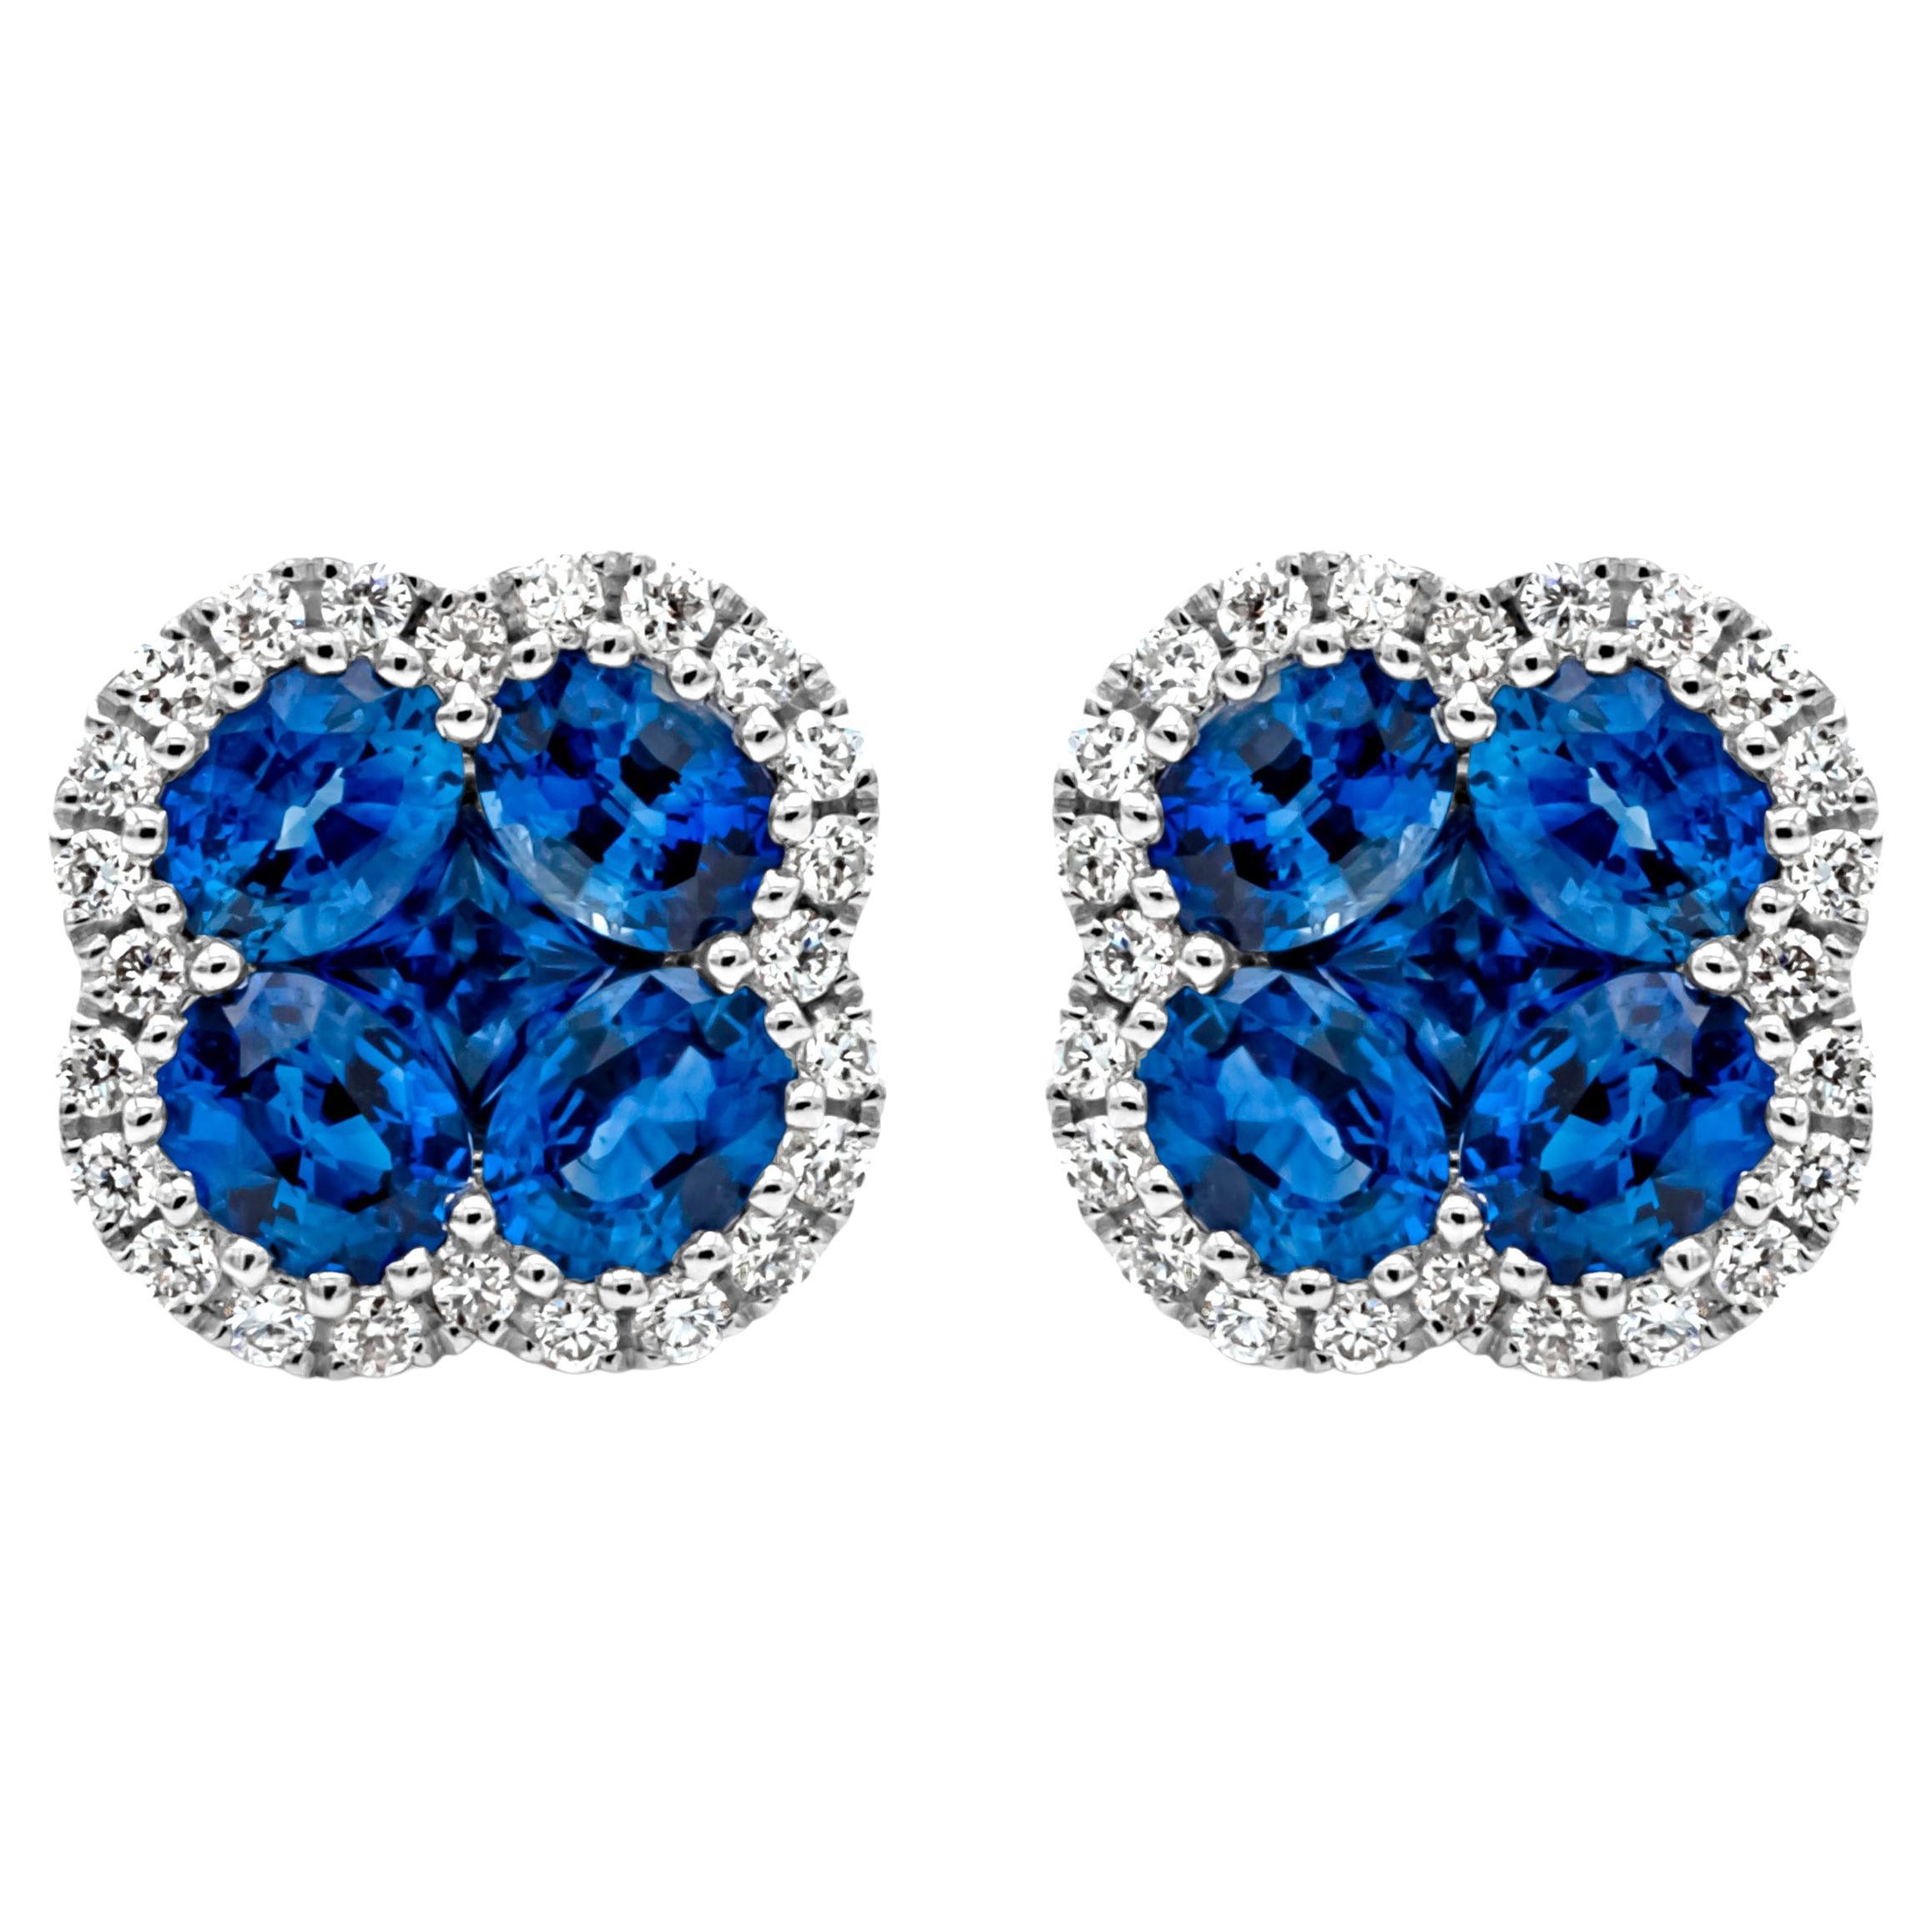 1.94 Carats Total Mixed Shape Blue Sapphire & Round Diamond Halo Stud Earrings For Sale